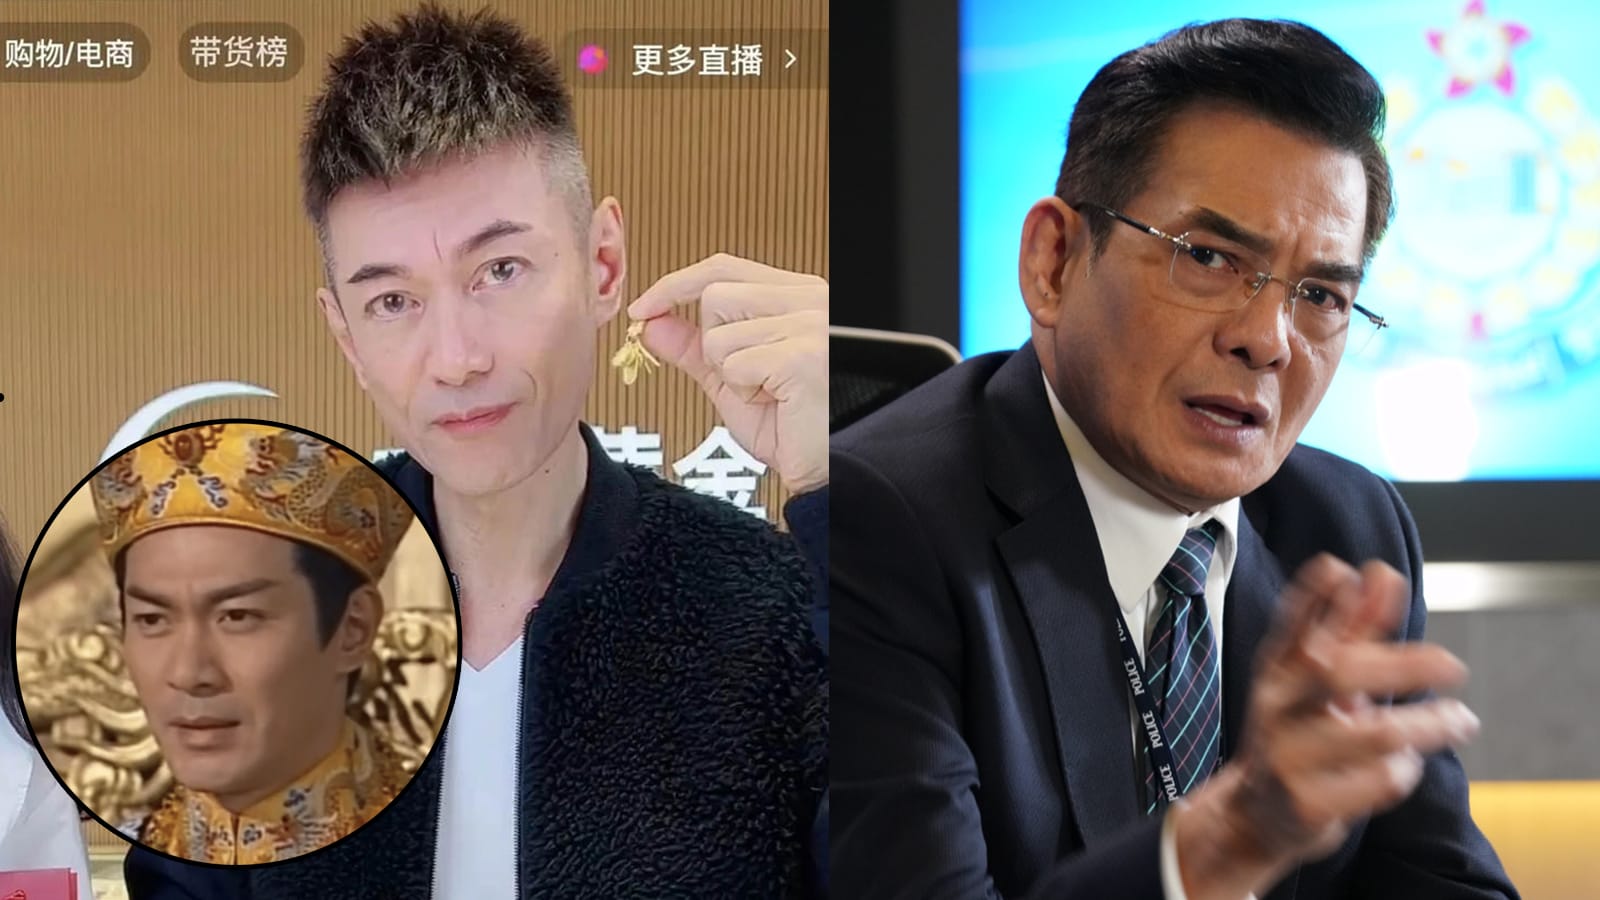 Move Over Lee Kwok Lun, Fellow HK Actor Kwong Wa Is Now The “Worst Celeb E-Commerce Streamer”